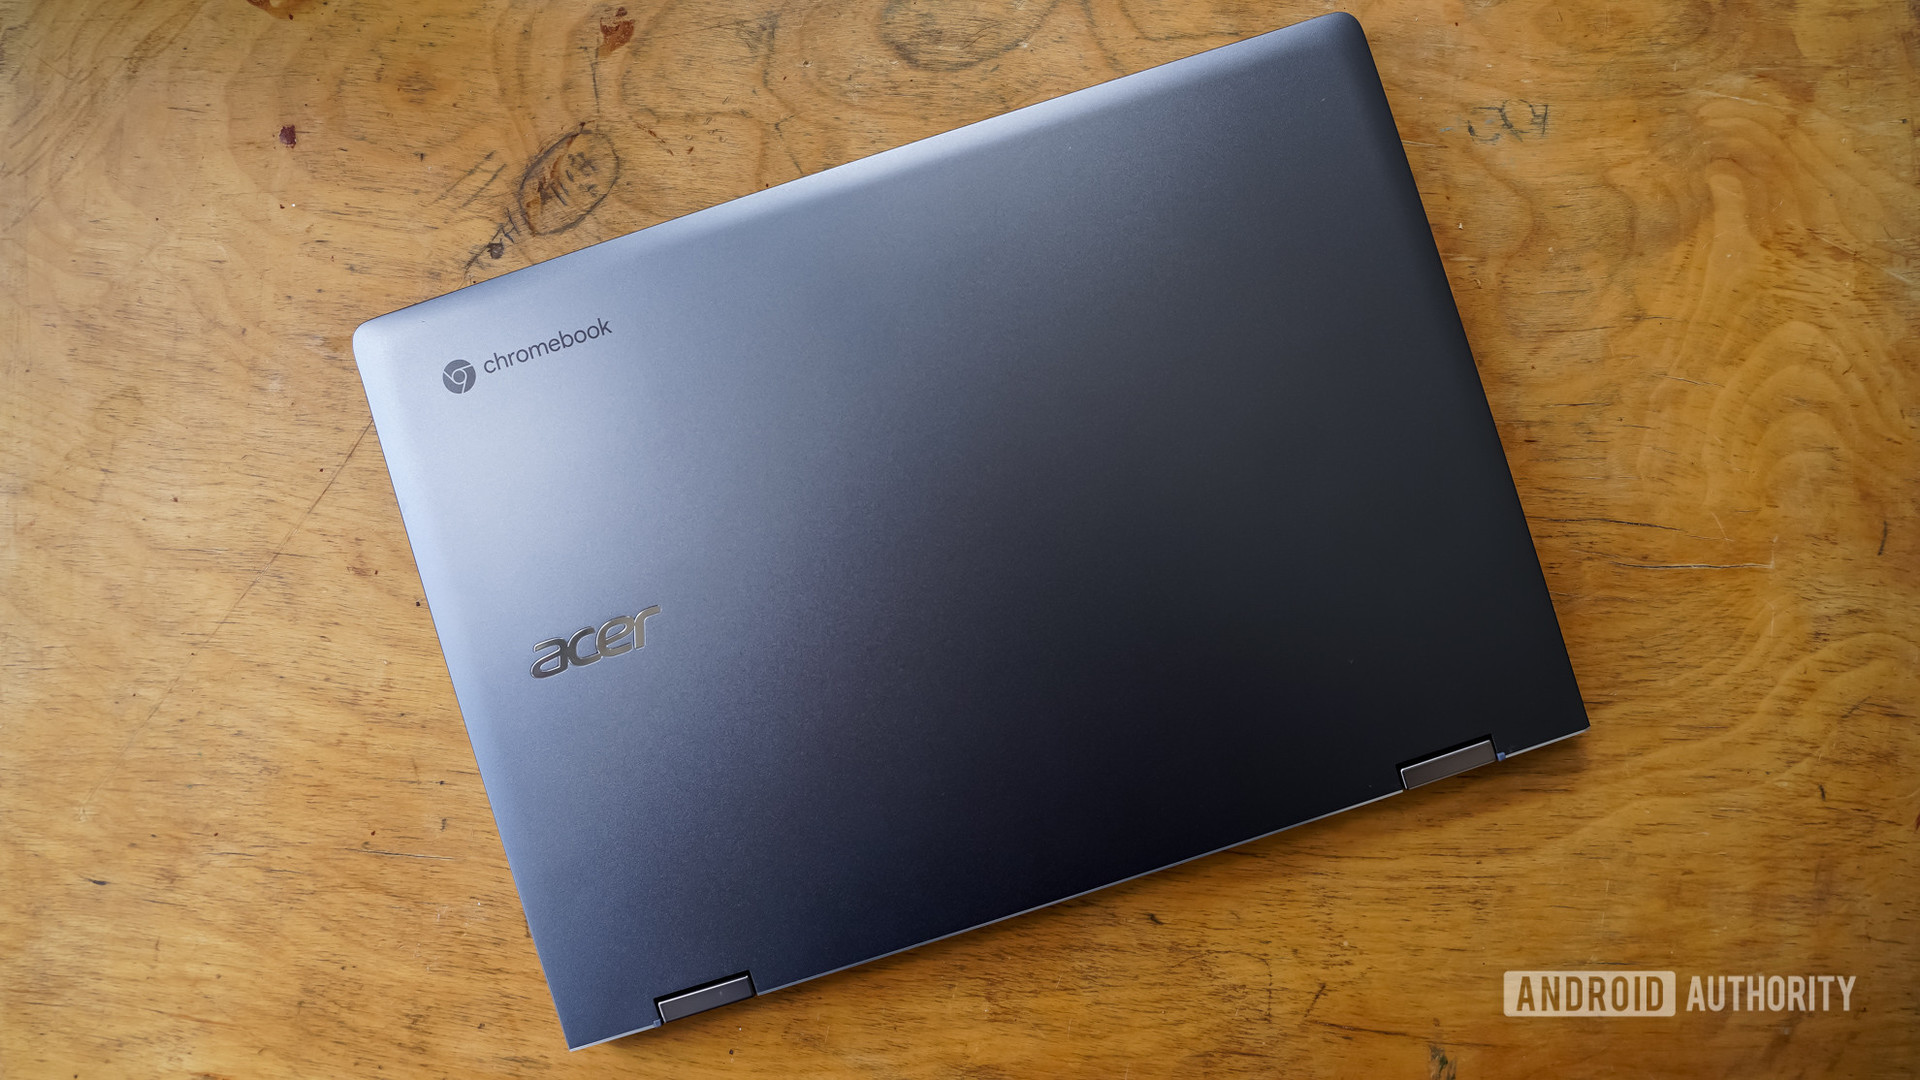 Chromebooks could be banned in schools in entire country due to data policies